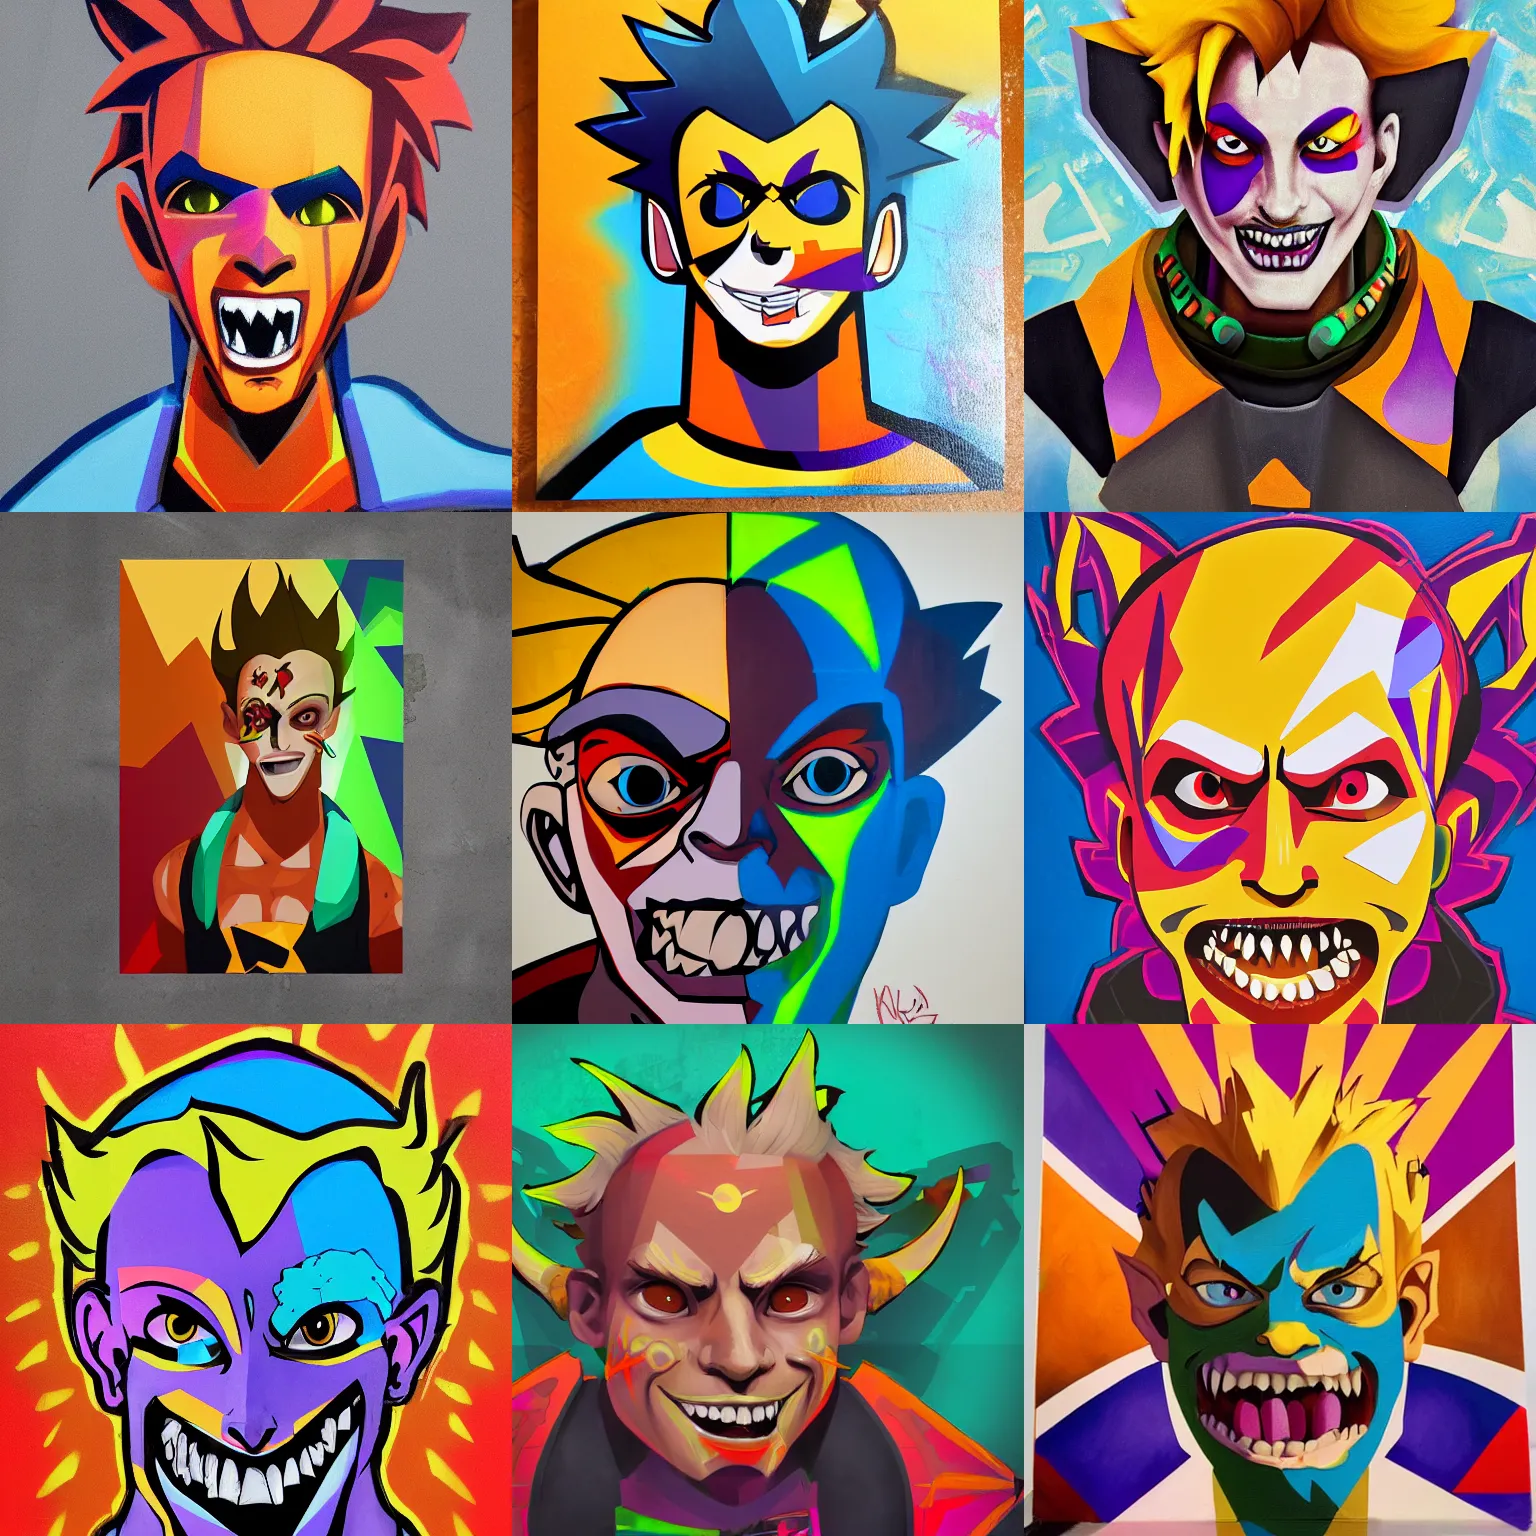 Prompt: A portrait of Junkrat (Overwatch), geometric shapes, rounded corners, vibrant colors, spray paint